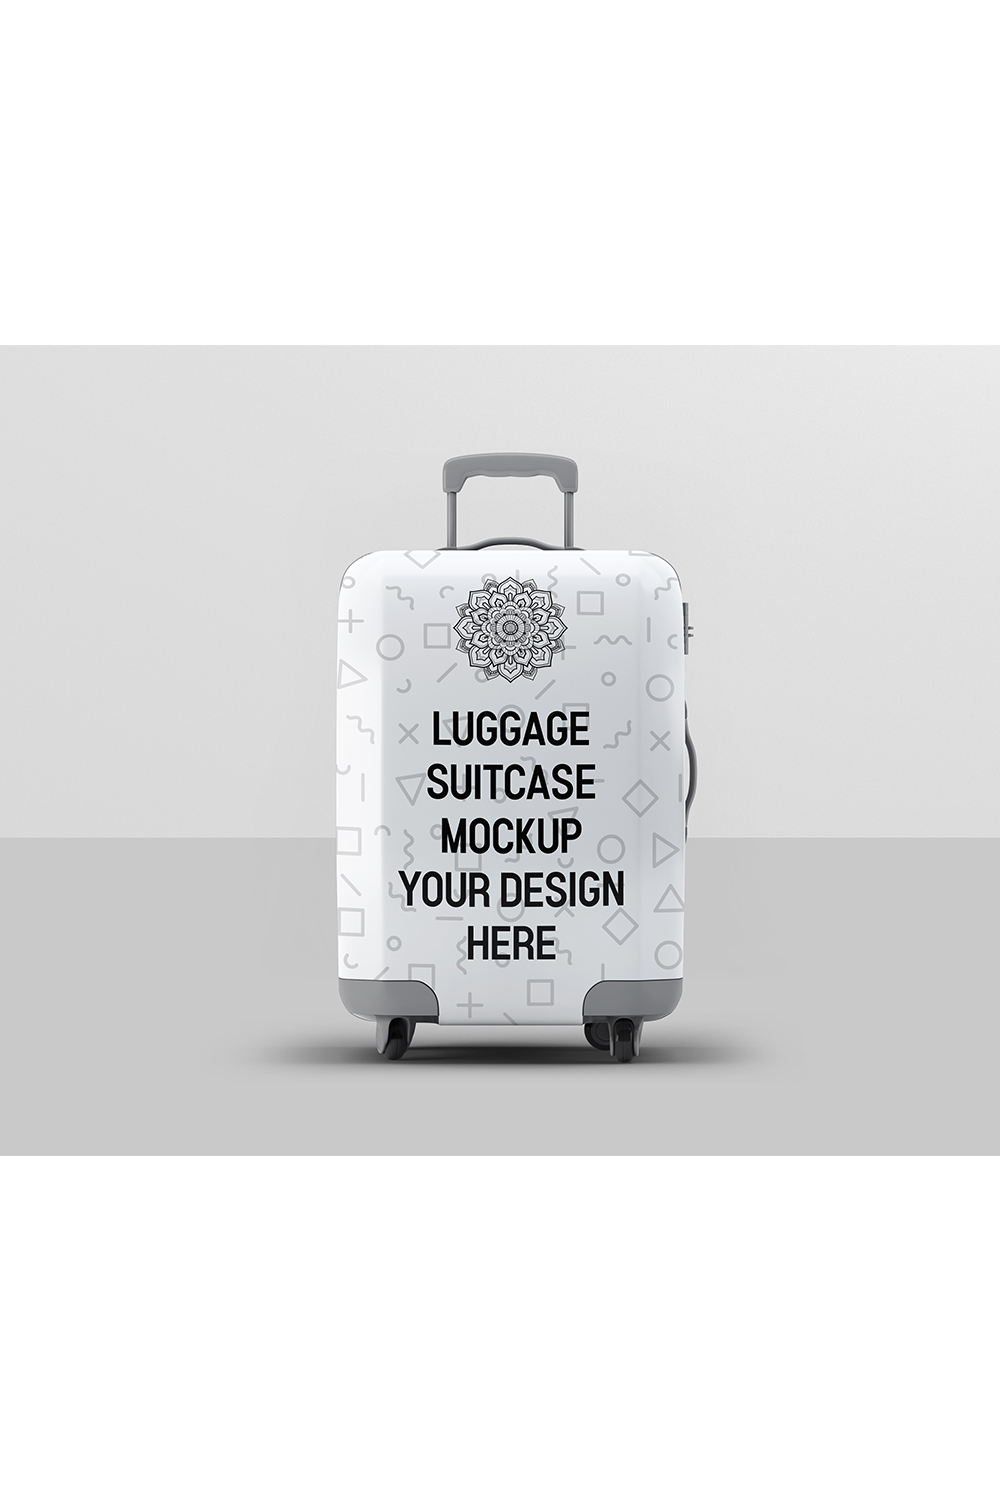 Luggage Suitcase Mockup pinterest preview image.